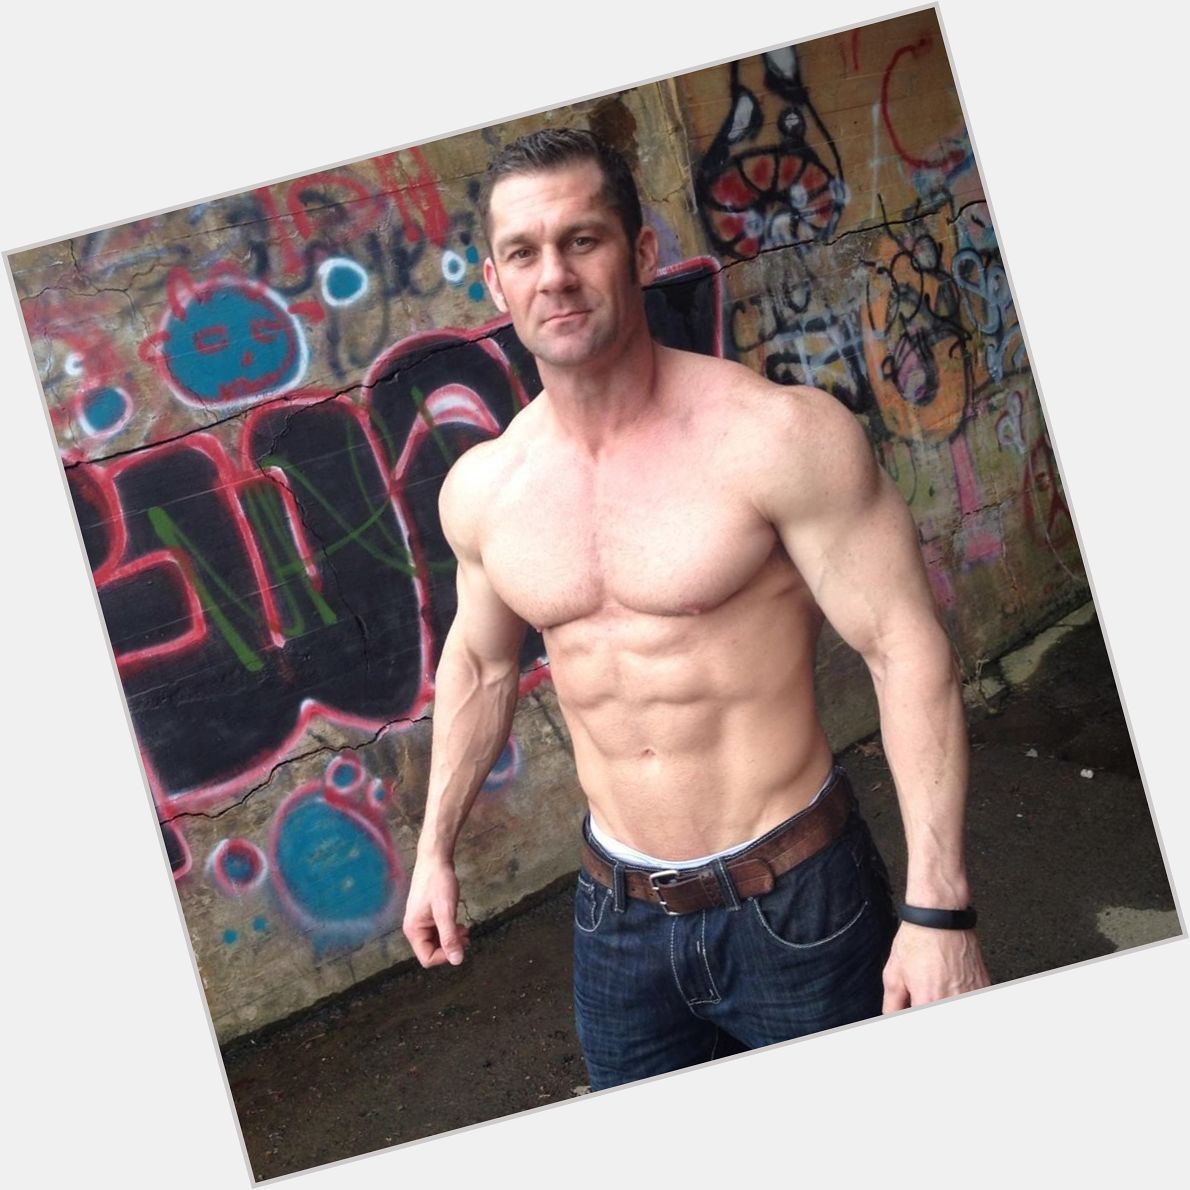 Http://fanpagepress.net/m/C/Chad Taylor Dating 2